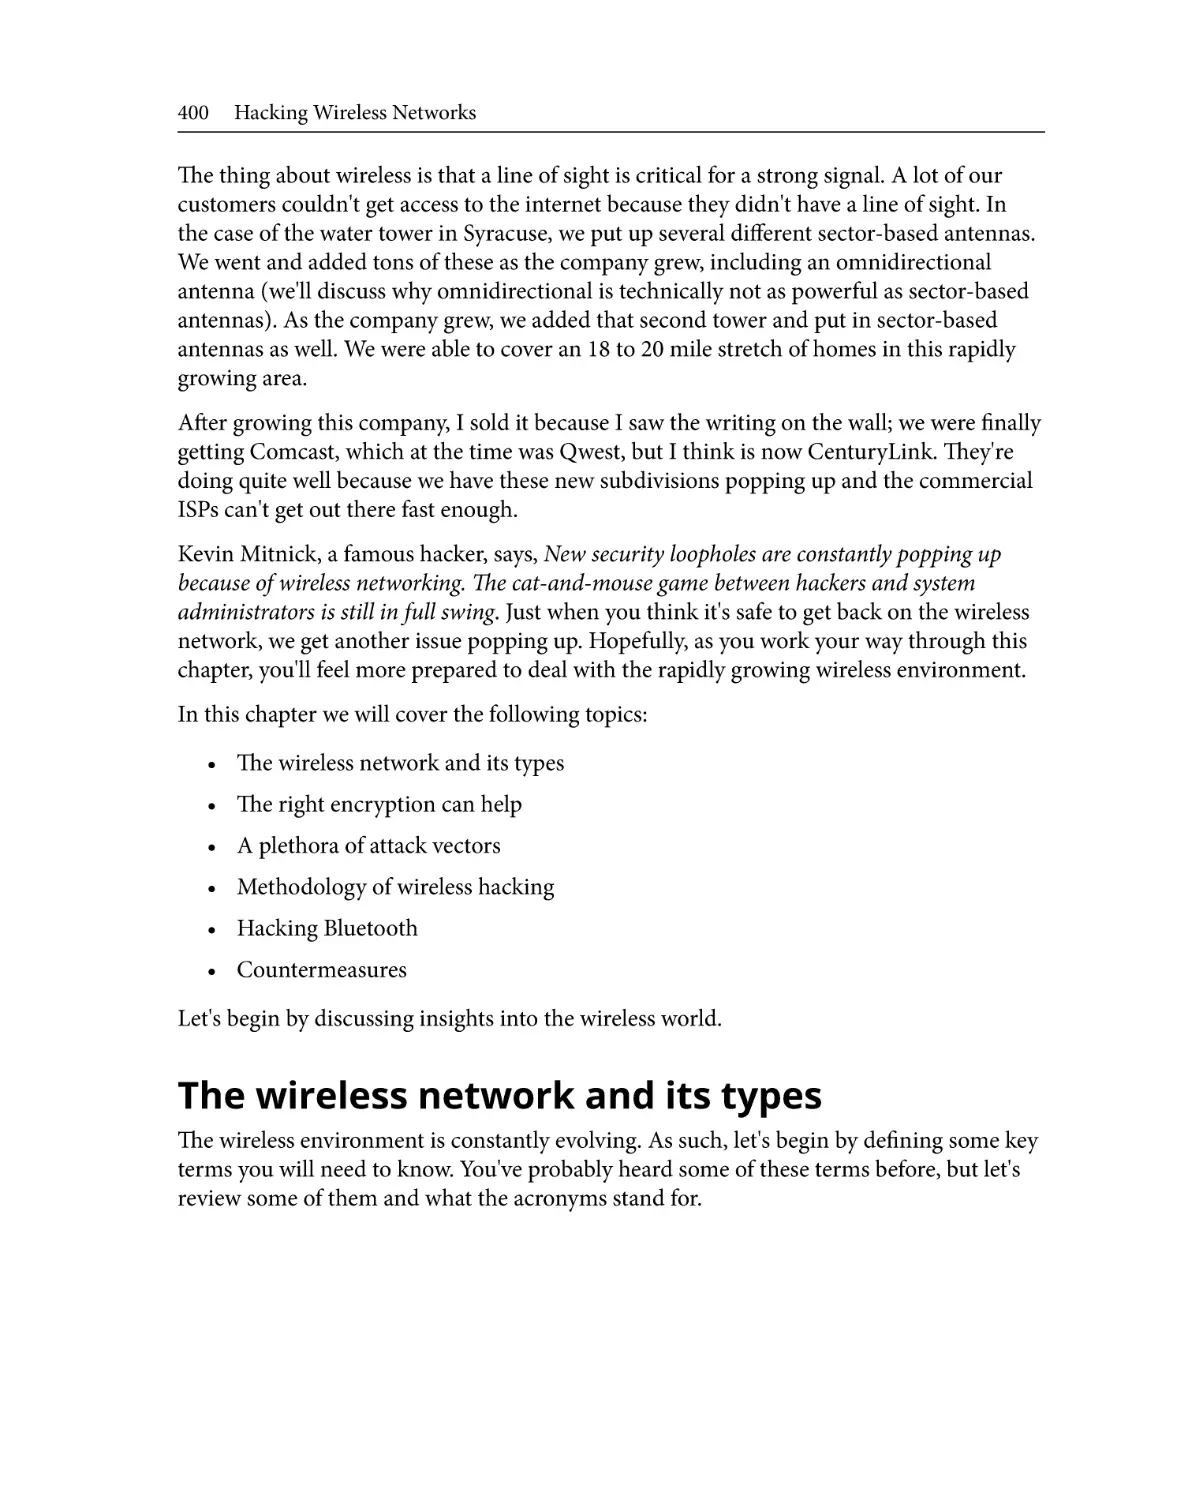 The wireless network and its types